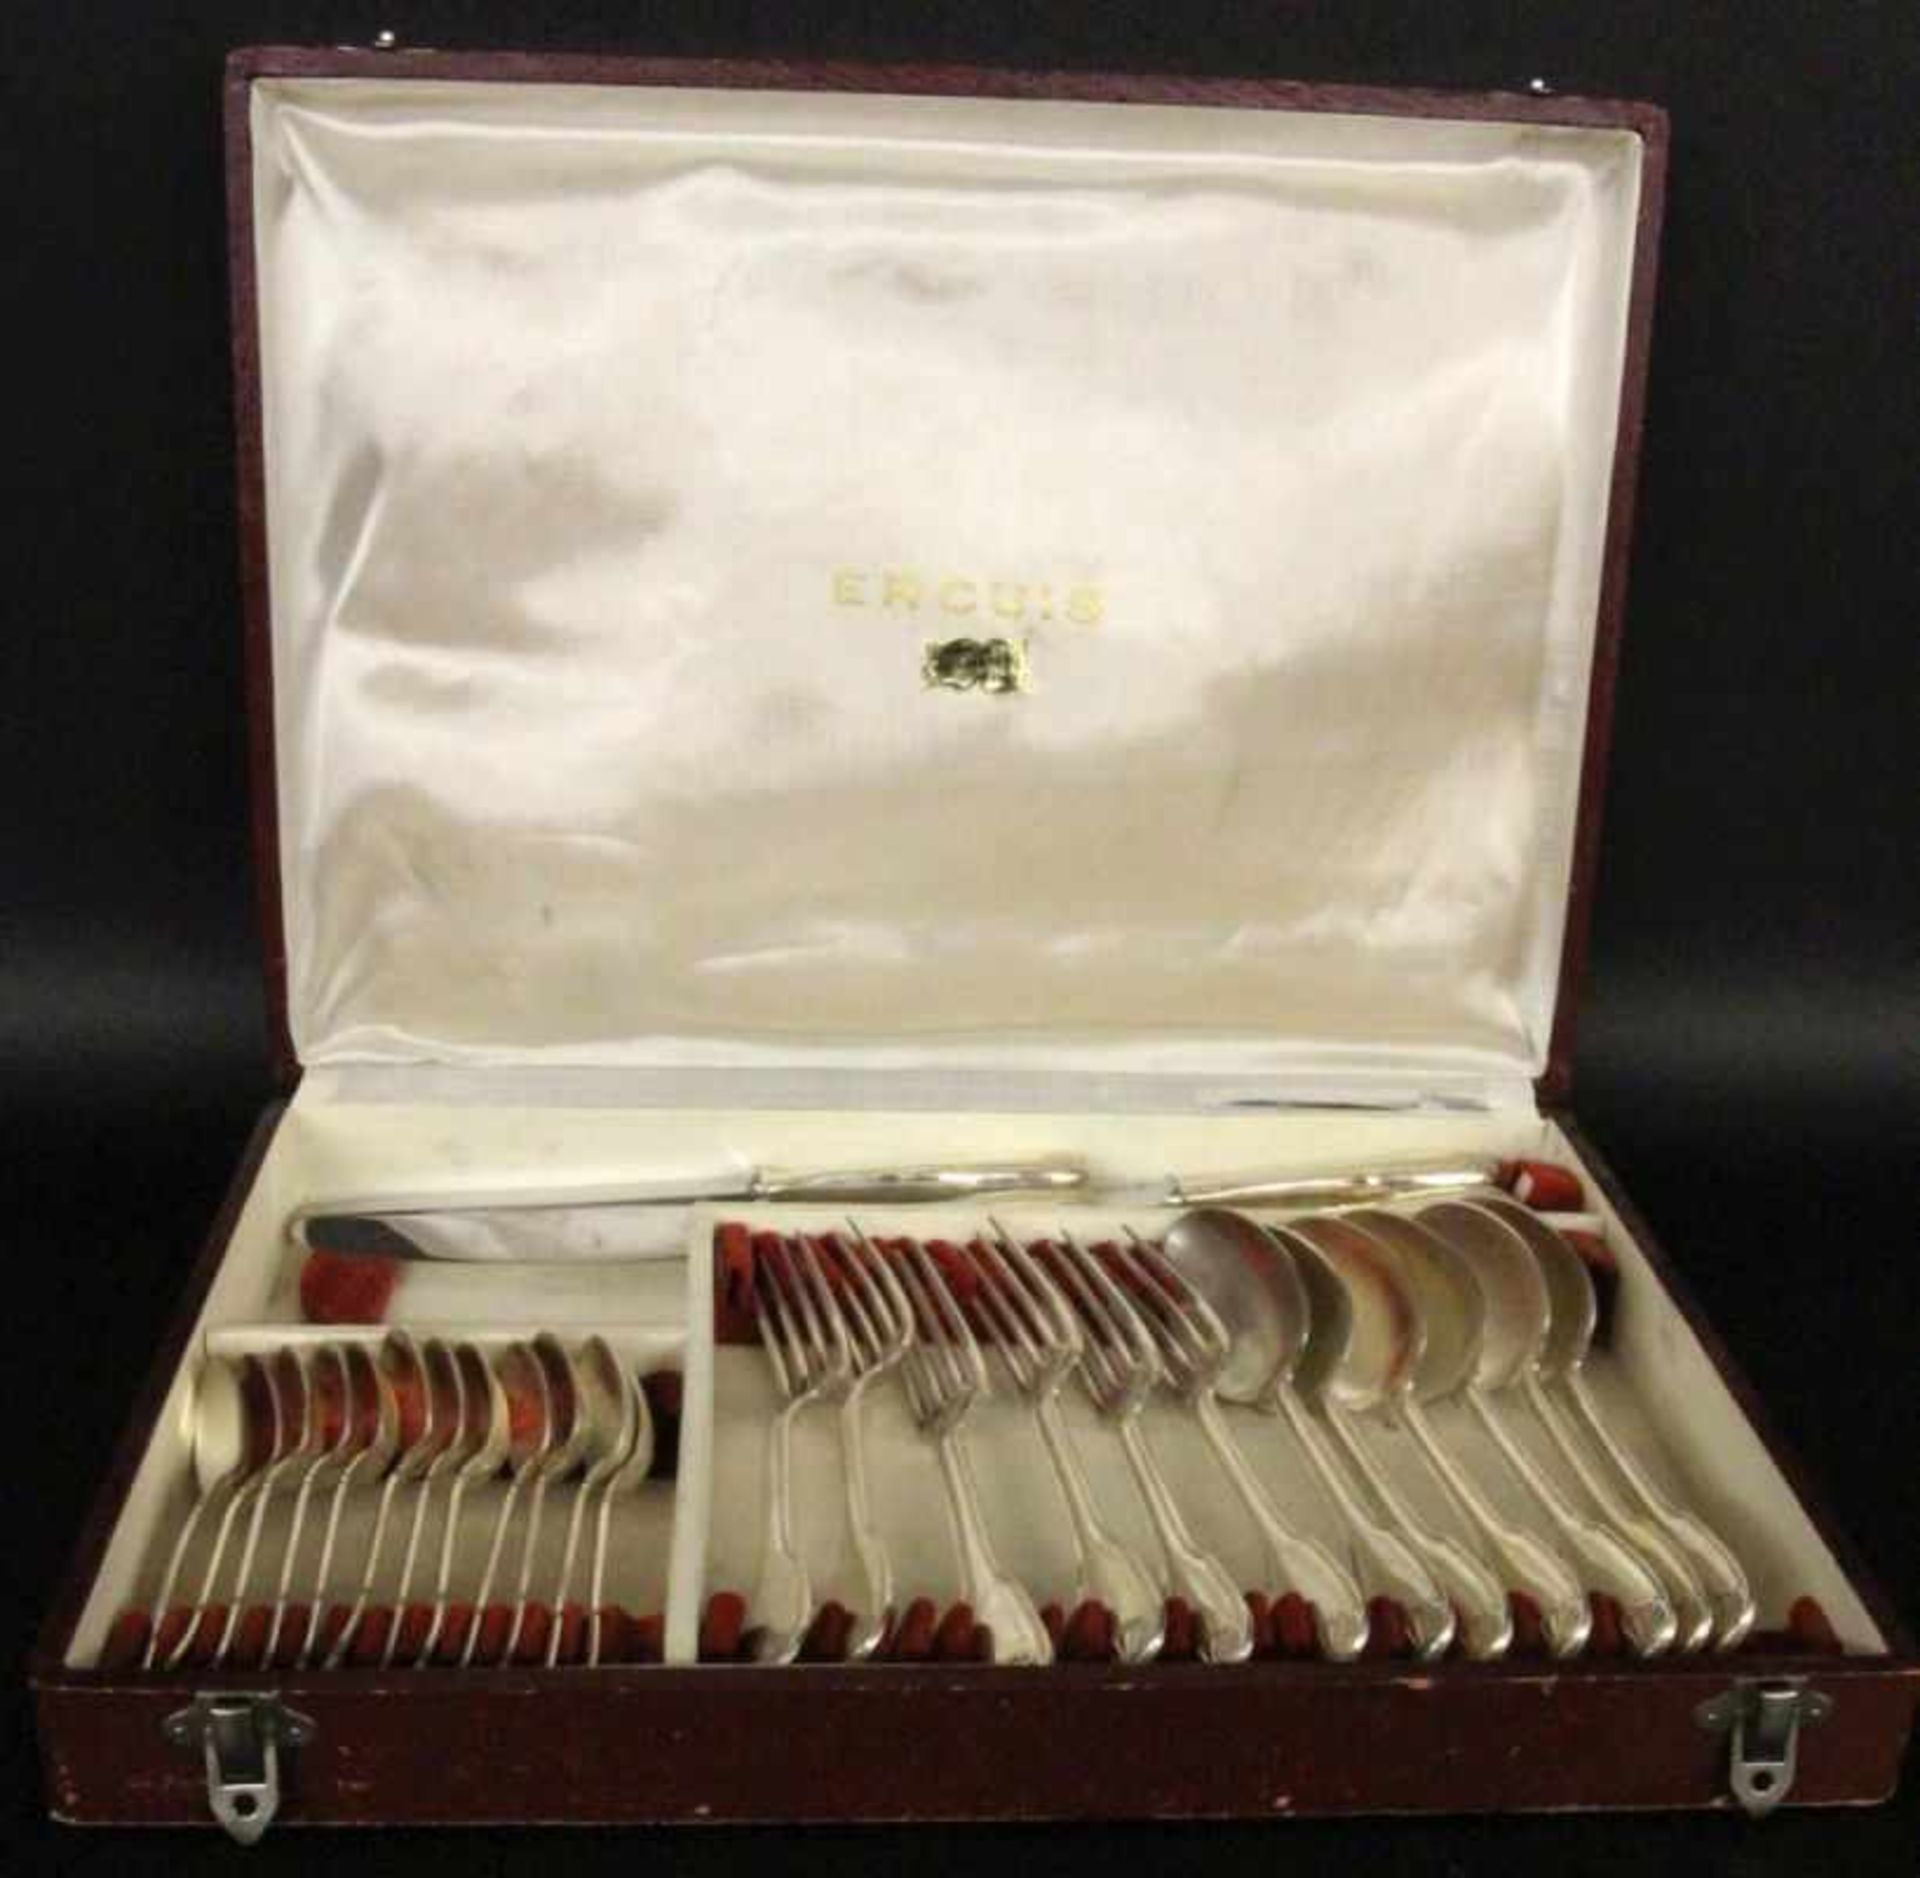 ''A DINNER CUTLERY SET, 30 pieces, for 6 persons. Forks, spoons, knives, dessert spoons and